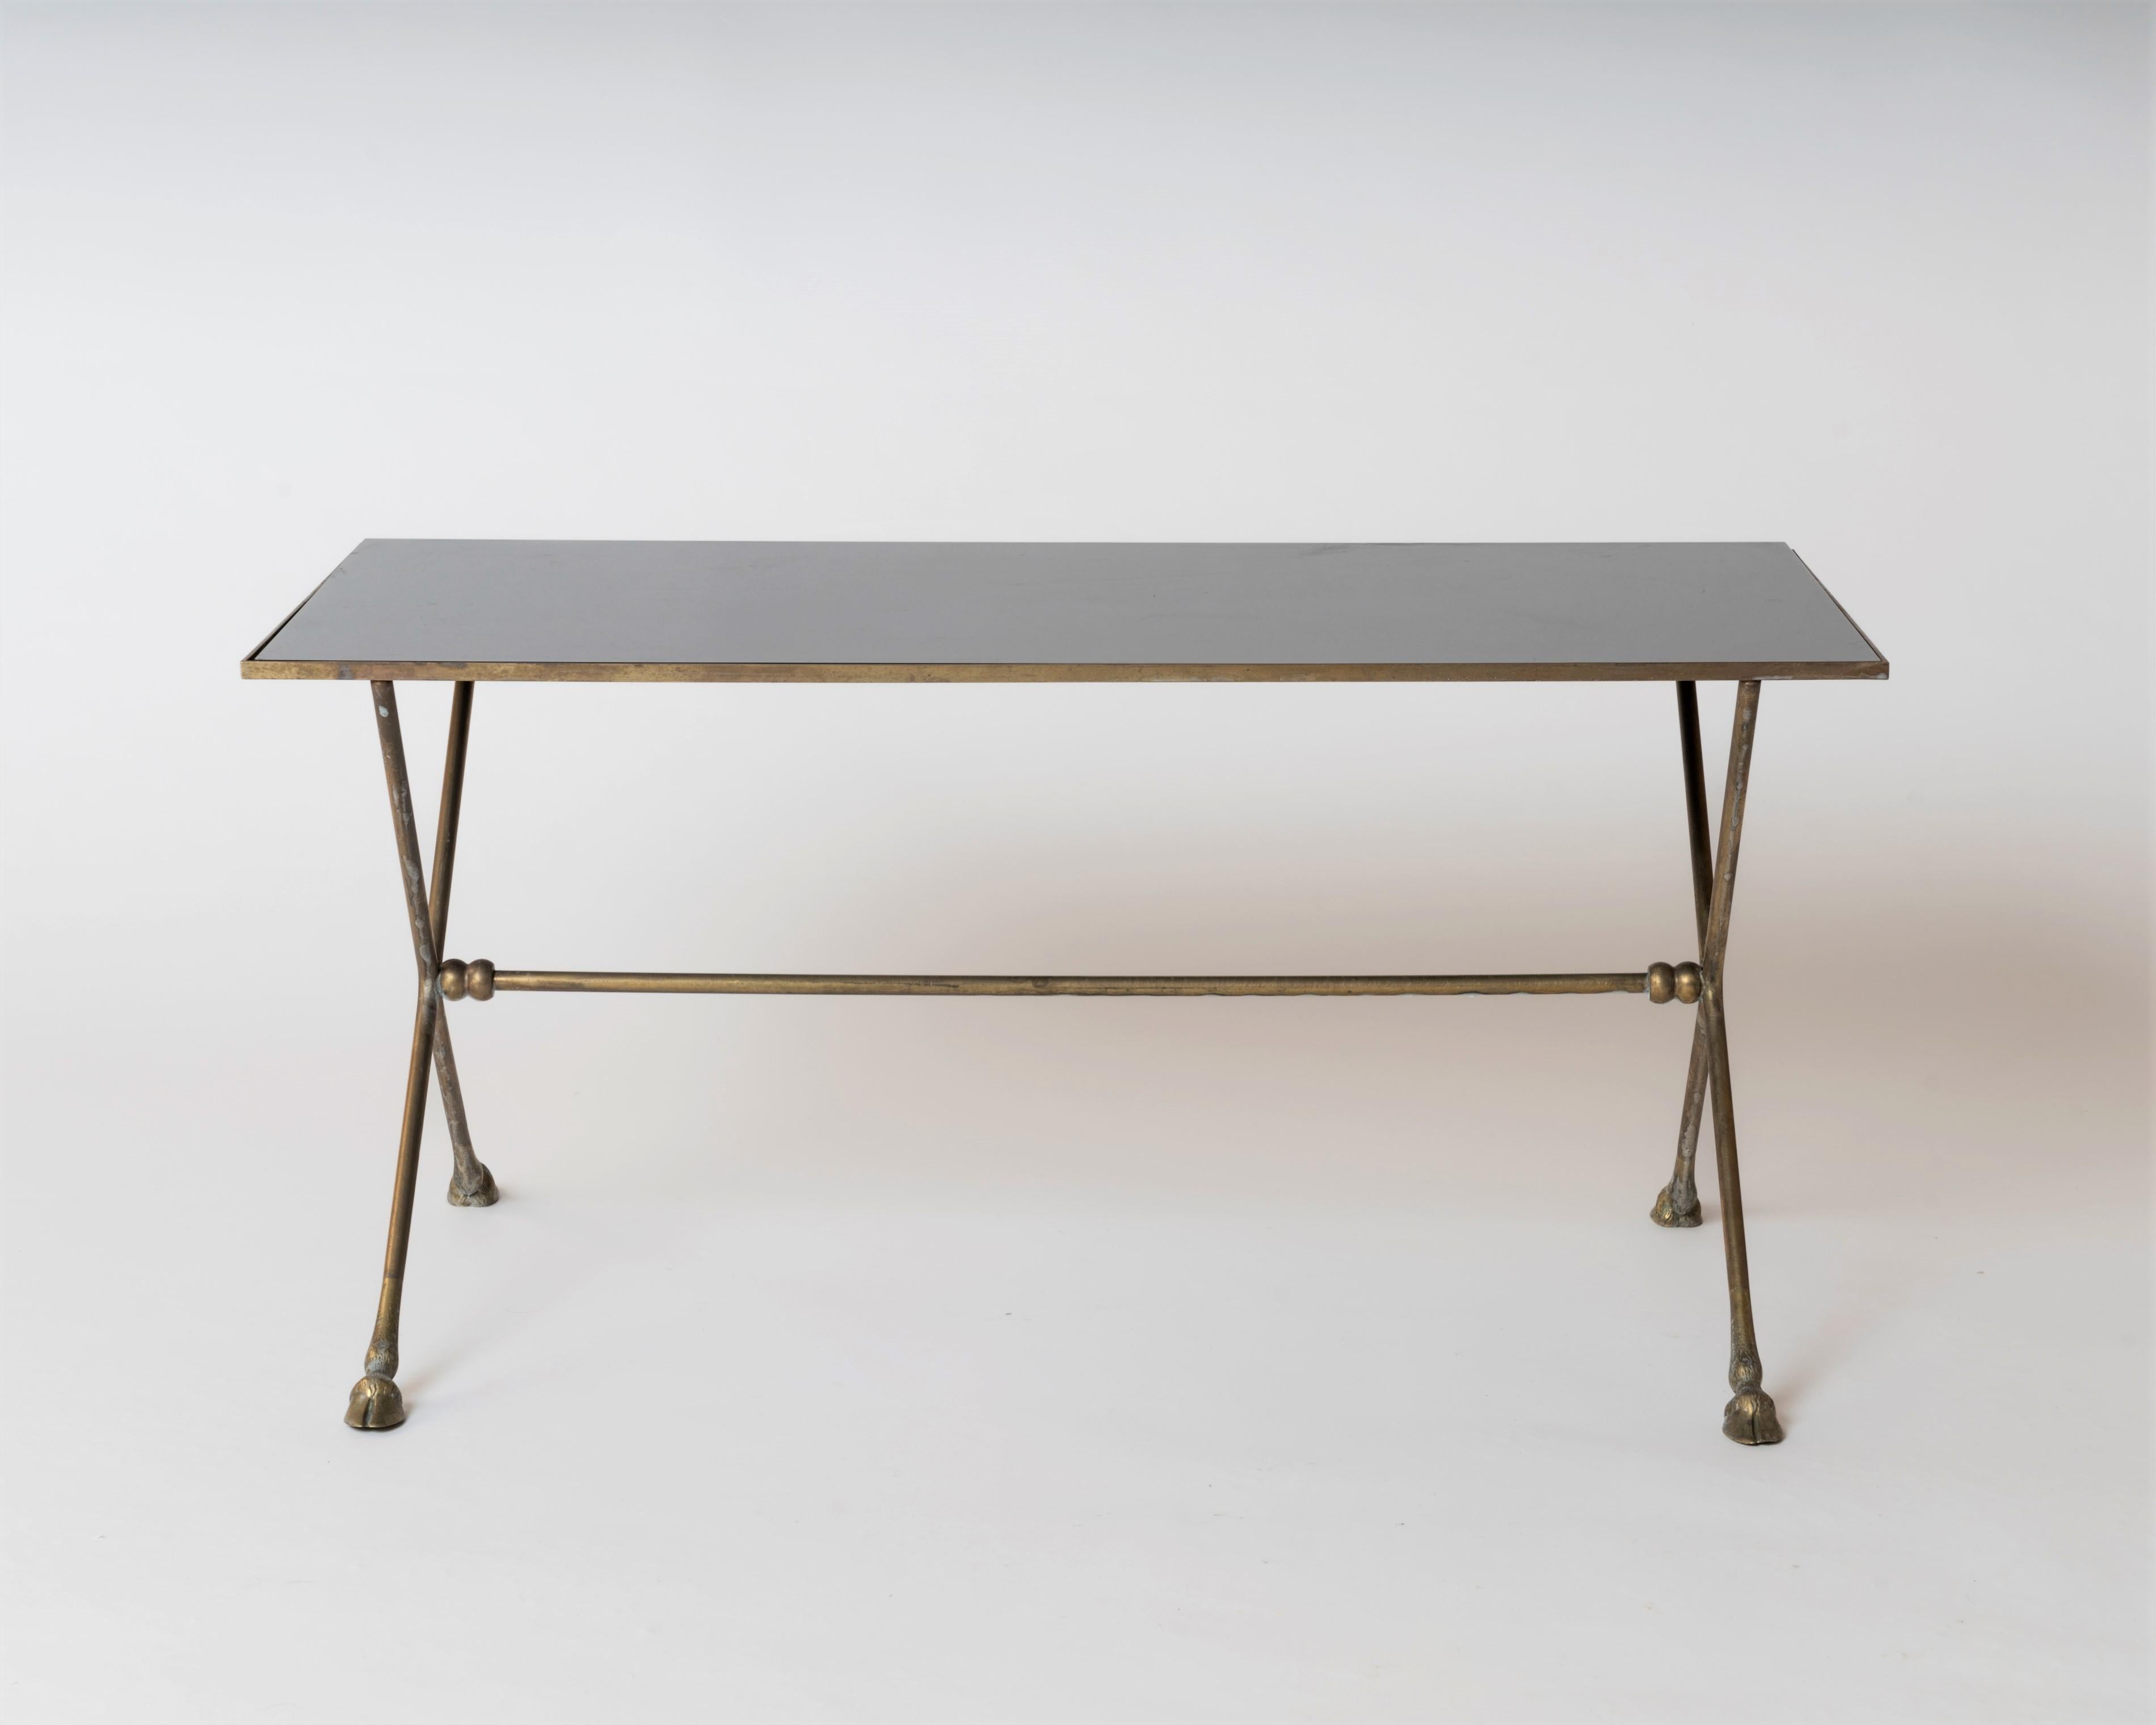 Elegantly neo-classical  bronze table by Maison Ramsay with hoof feet and black opaline top. X-shaped legs with intermediary 